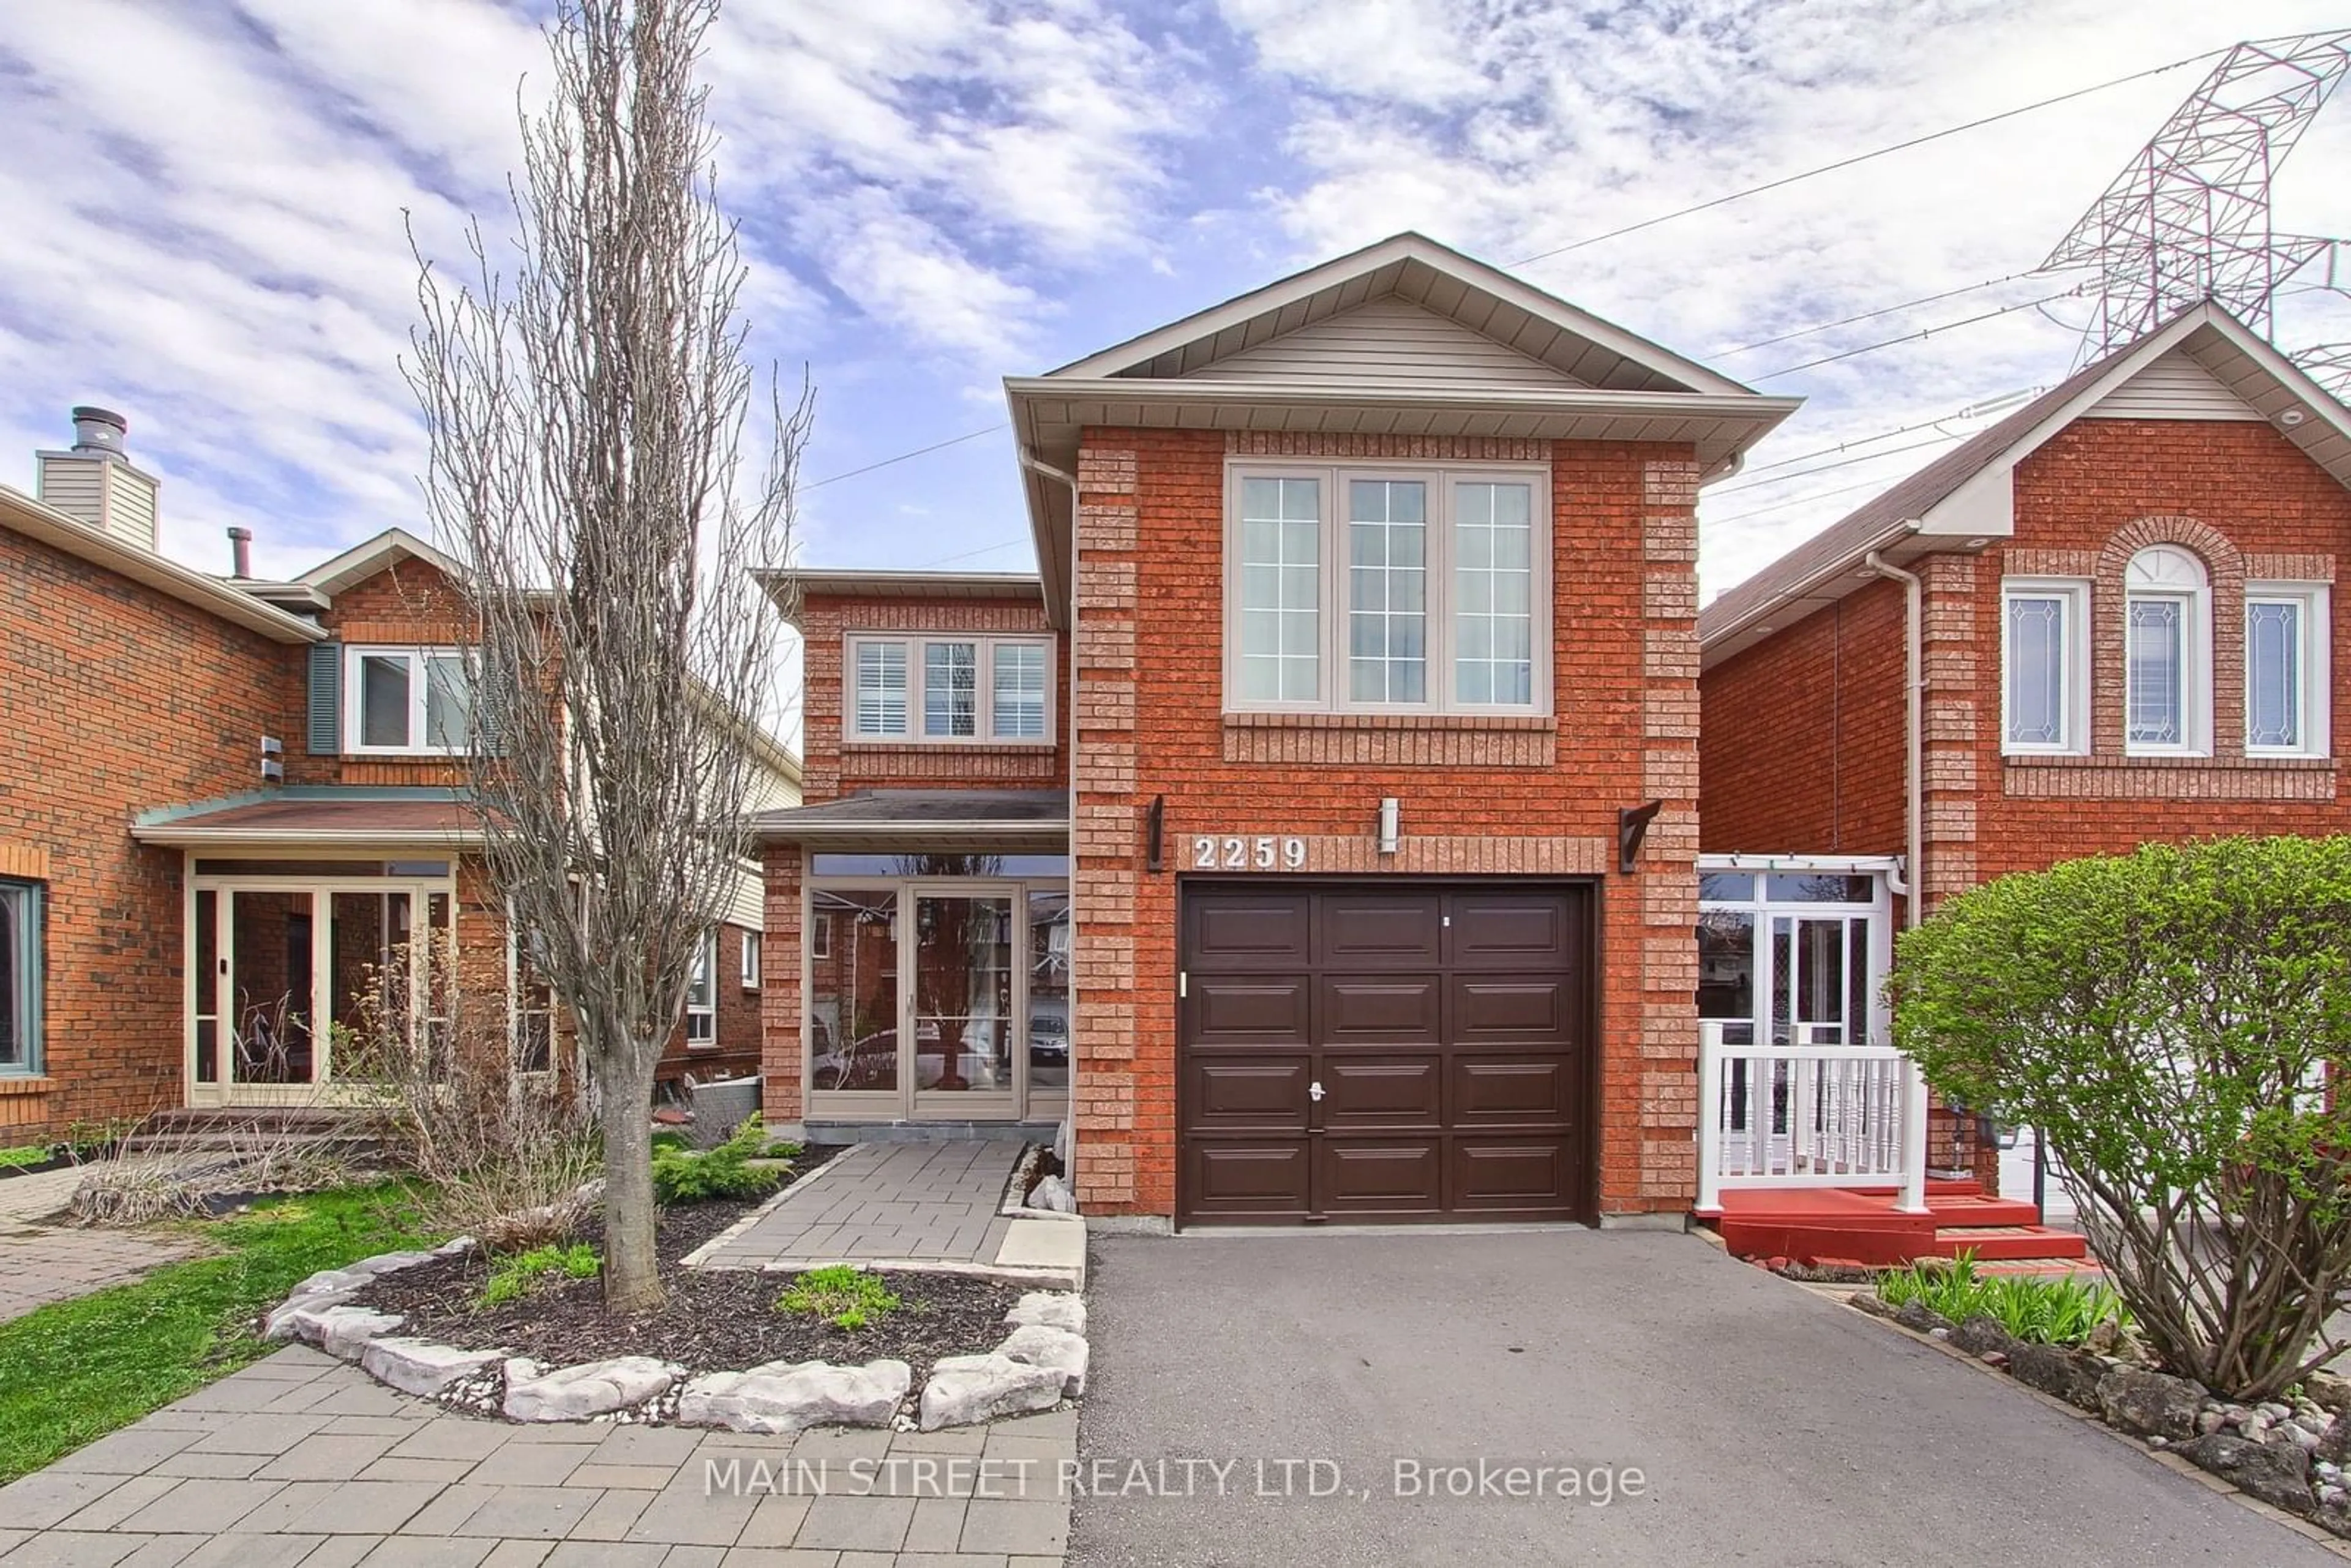 Home with brick exterior material for 2259 Wildwood Cres, Pickering Ontario L1X 2R7